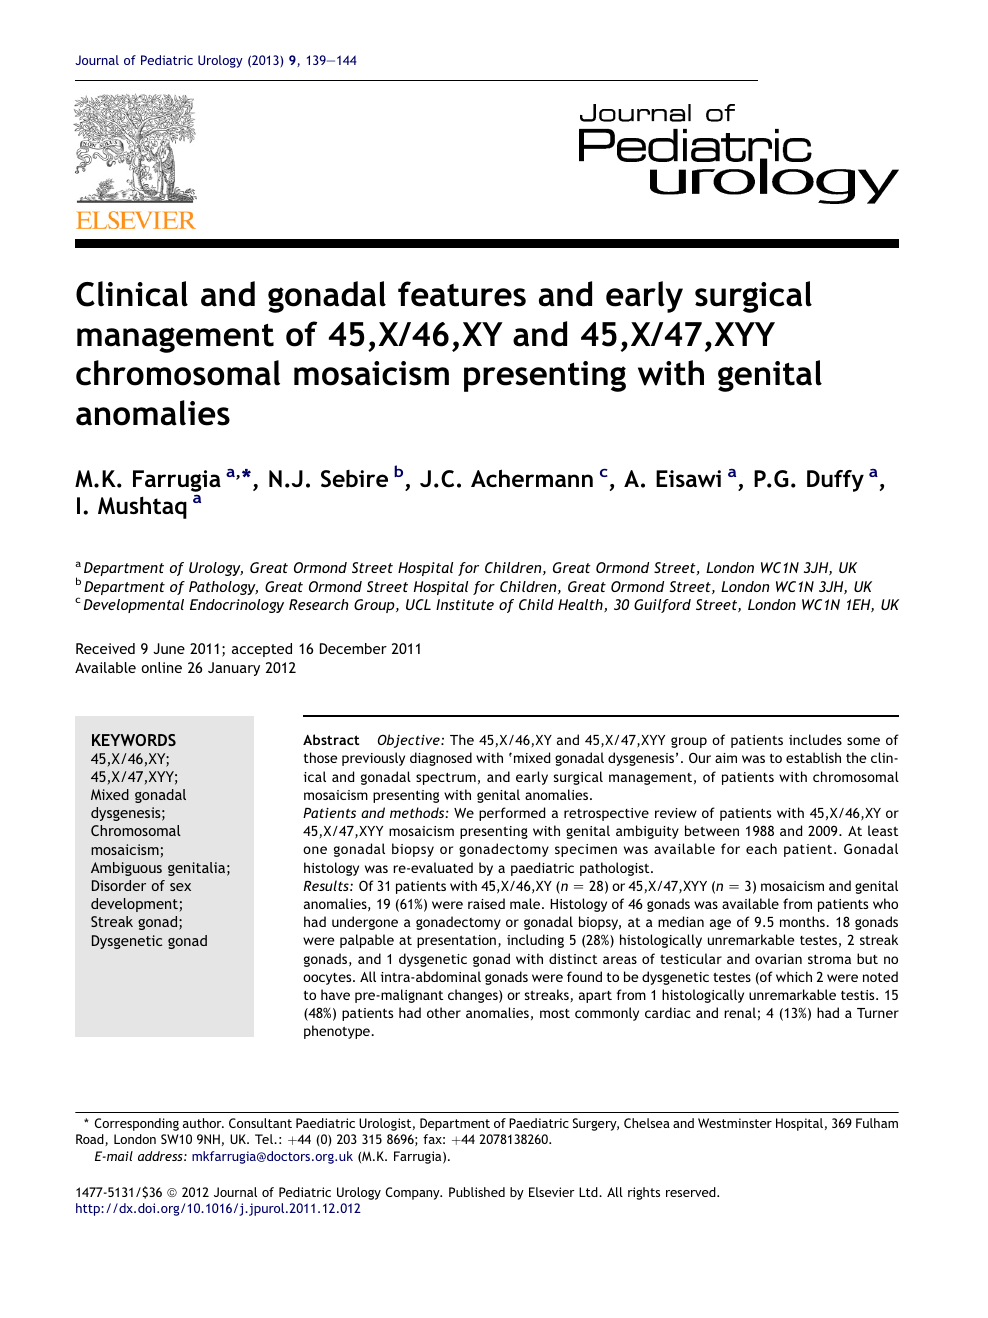 Clinical And Gonadal Features And Early Surgical Management Of 45 X 46 Xy And 45 X 47 Xyy Chromosomal Mosaicism Presenting With Genital Anomalies Topic Of Research Paper In Clinical Medicine Download Scholarly Article Pdf And Read